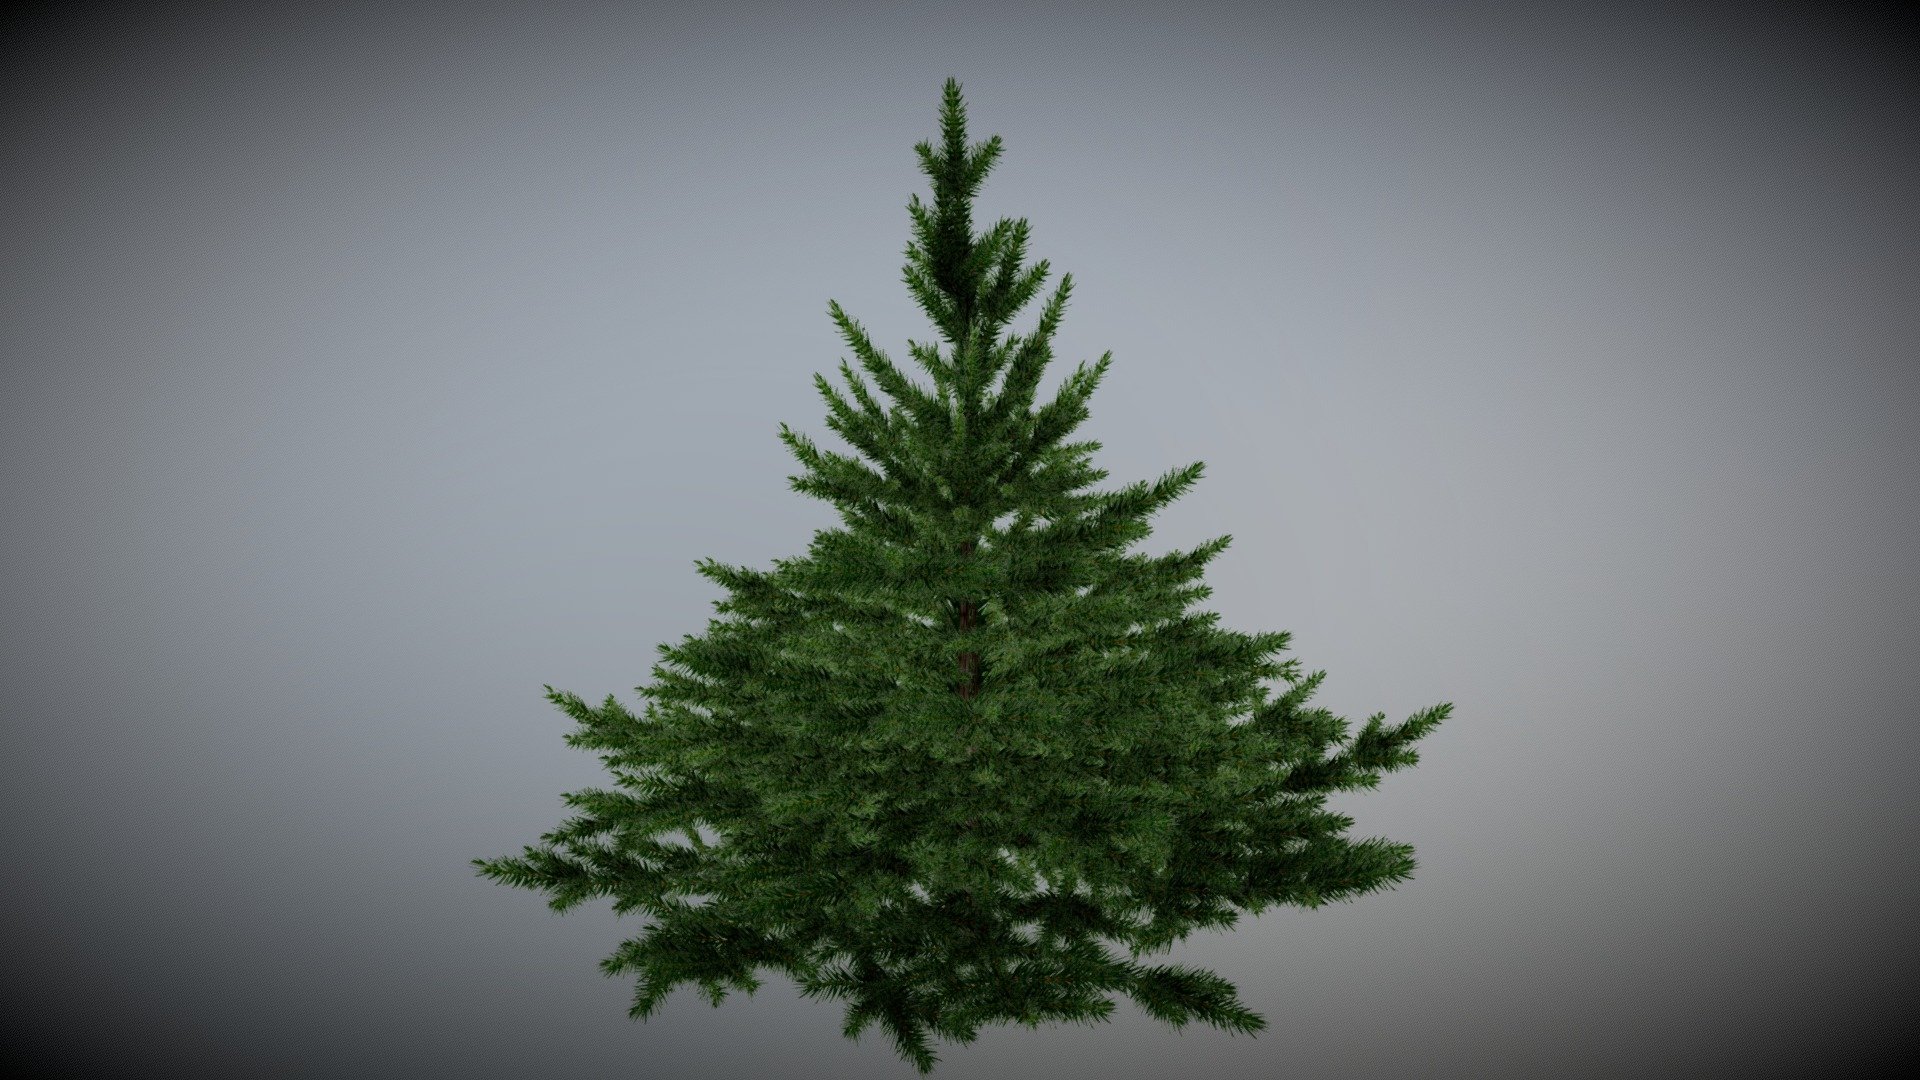 Low Poly Christmas Tree - Realistic
Undecorated version

13.2k triangles, complete model! - Realistic Christmas Tree -undecorated - Buy Royalty Free 3D model by Phil Gornall (@philgornall1967) 3d model